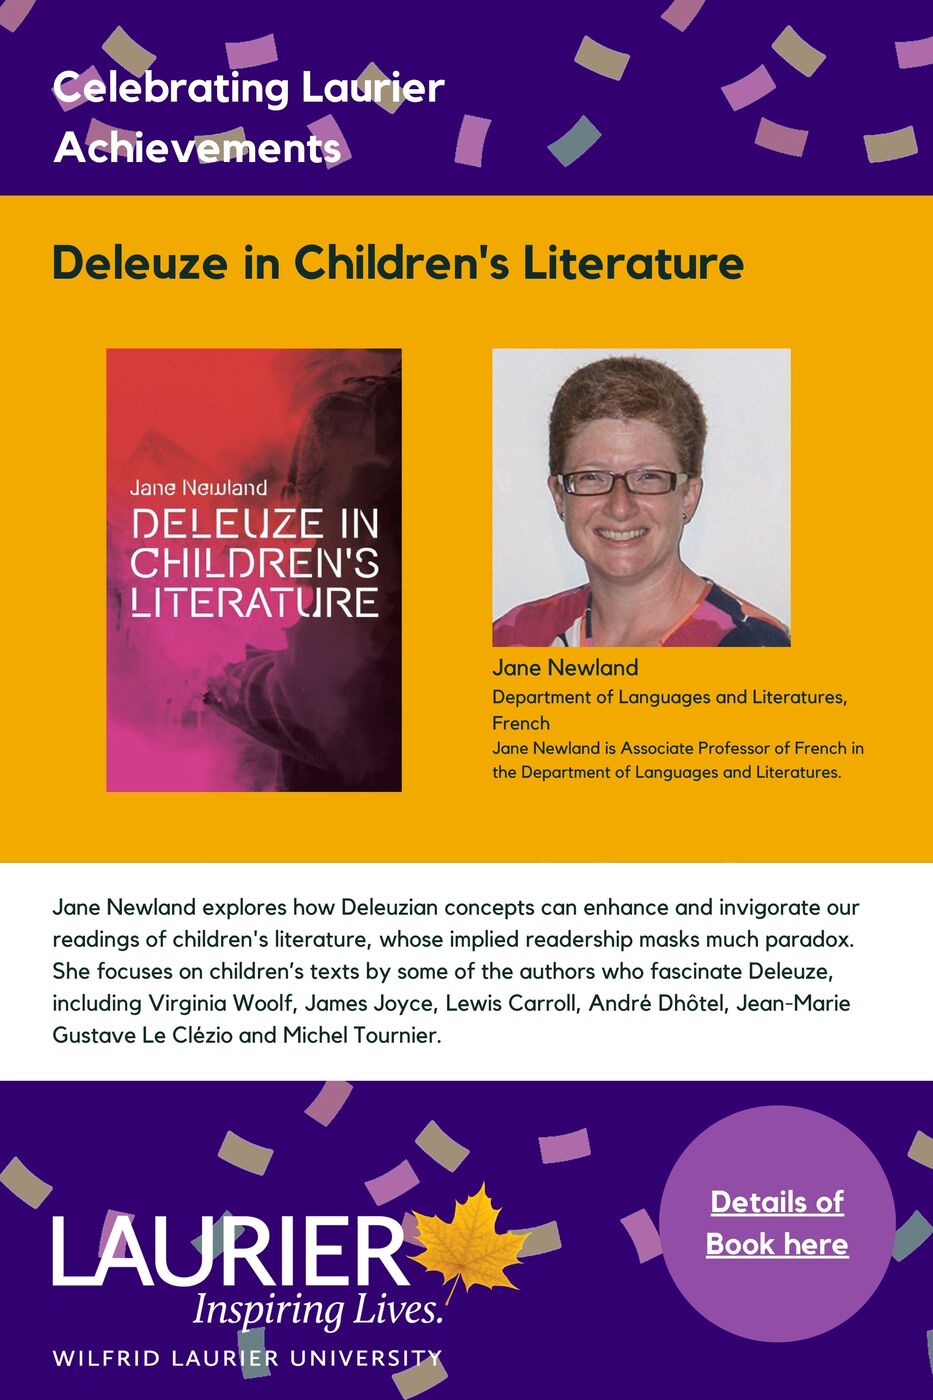 Deleuze in Children's Literature promtional poster for the Celebrating Laurier Achievements program with a headshot of the book's author, Jane Newland.